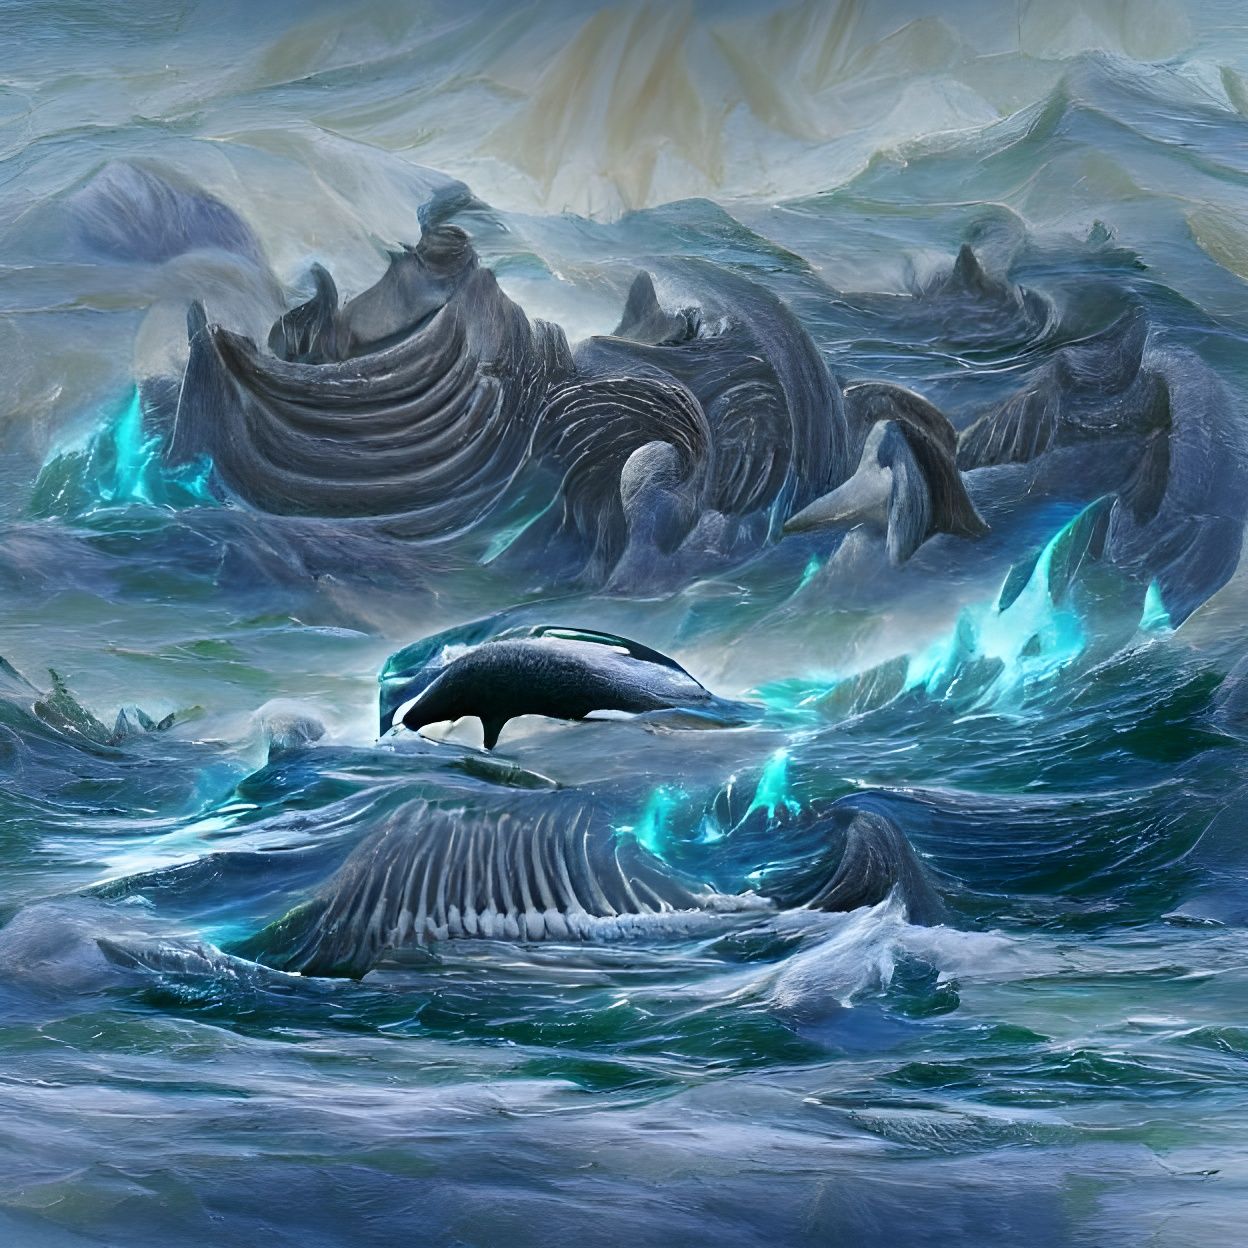 Ancient whale in ancient raging ocean.